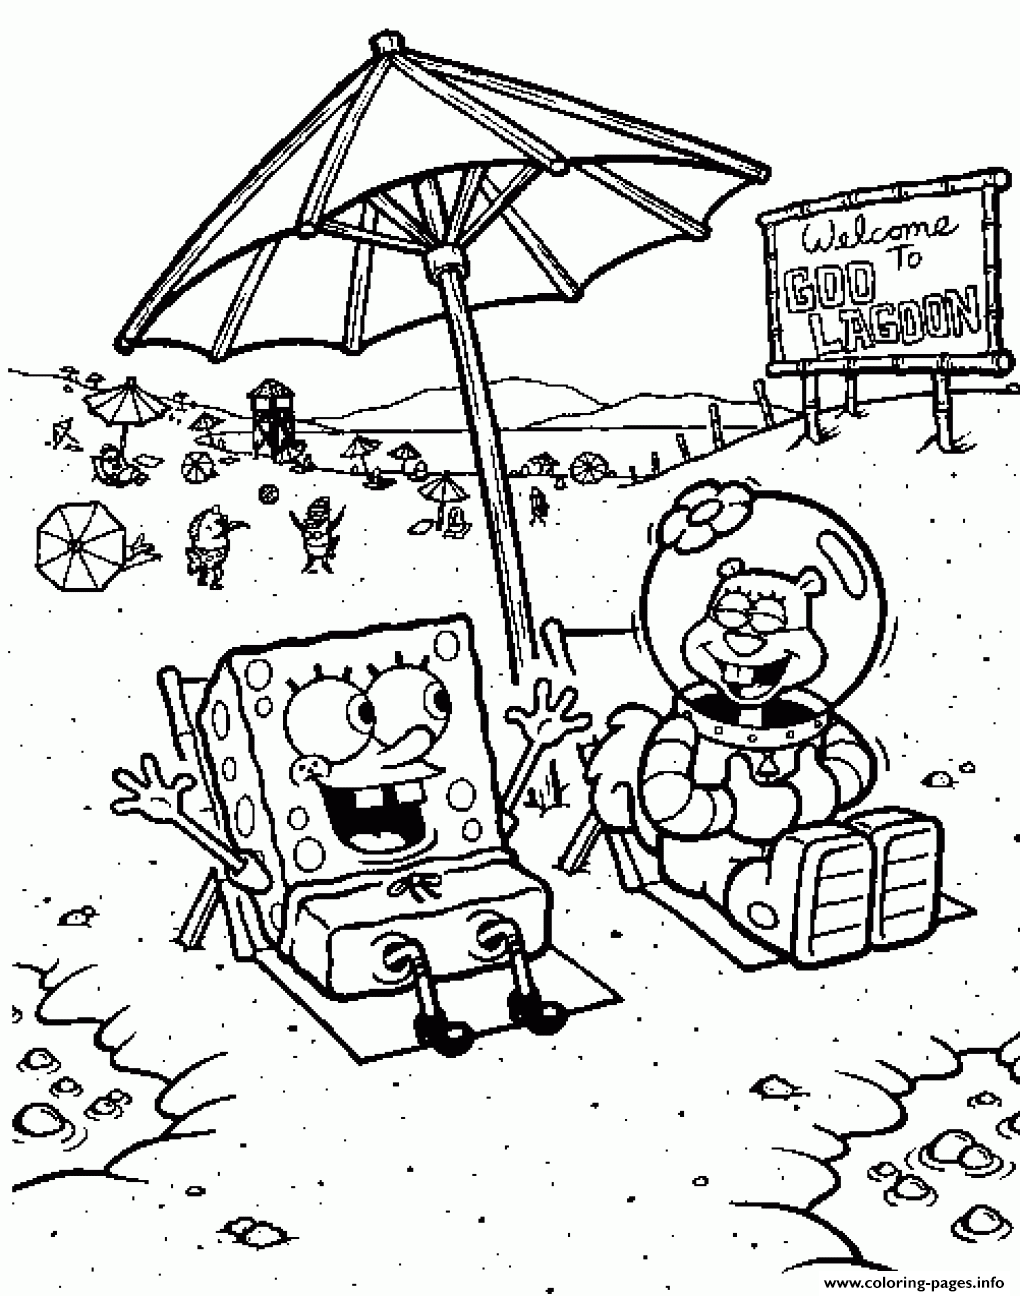 Coloring Pages For Kids Spongebob And Sandycf88 coloring